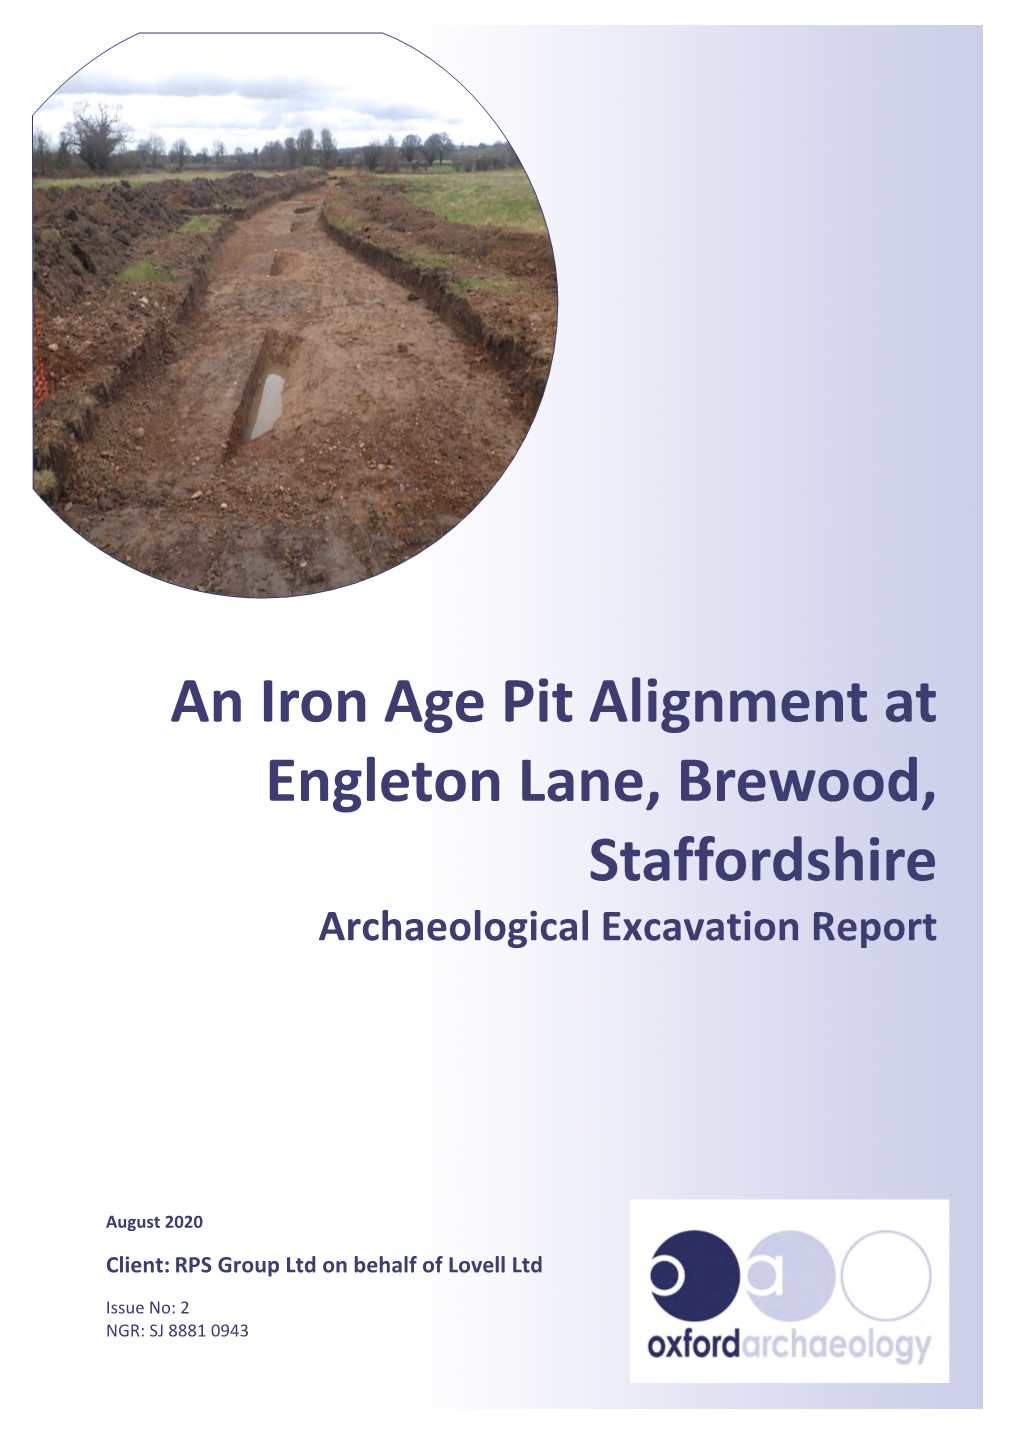 An Iron Age Pit Alignment at Engleton Lane, Brewood, Staffordshire